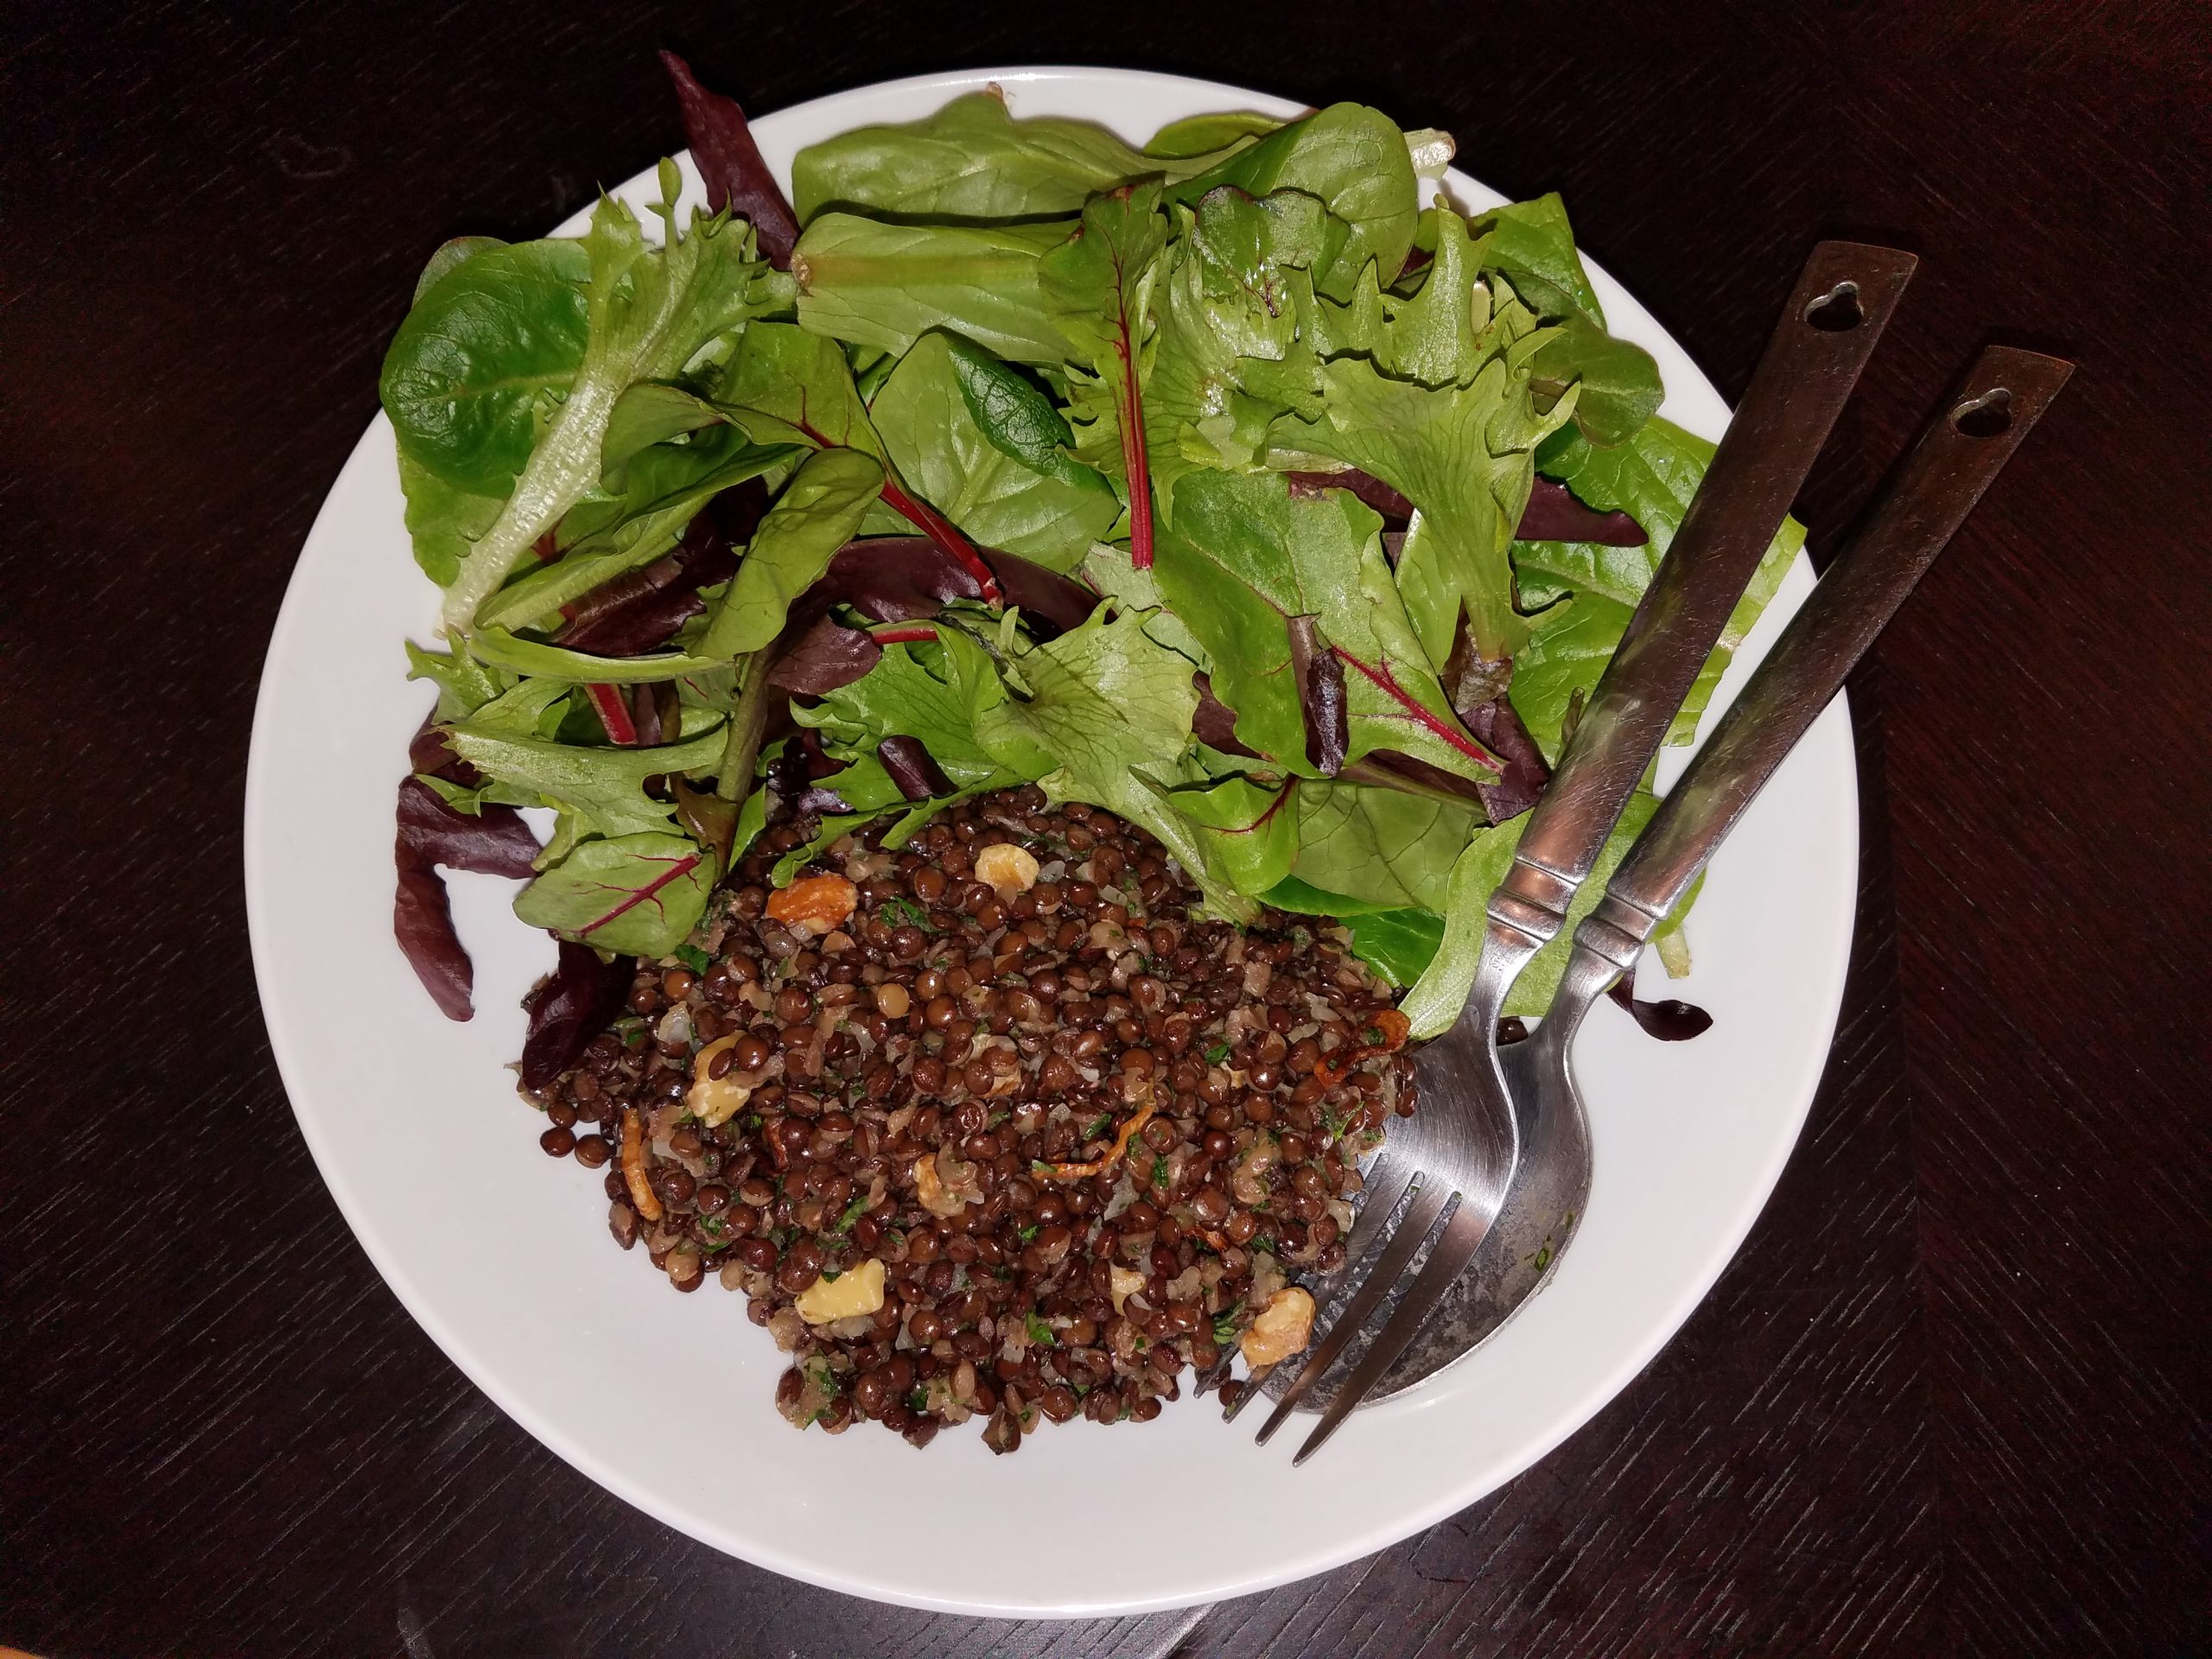 Lentil Salad with Walnuts and Shallots